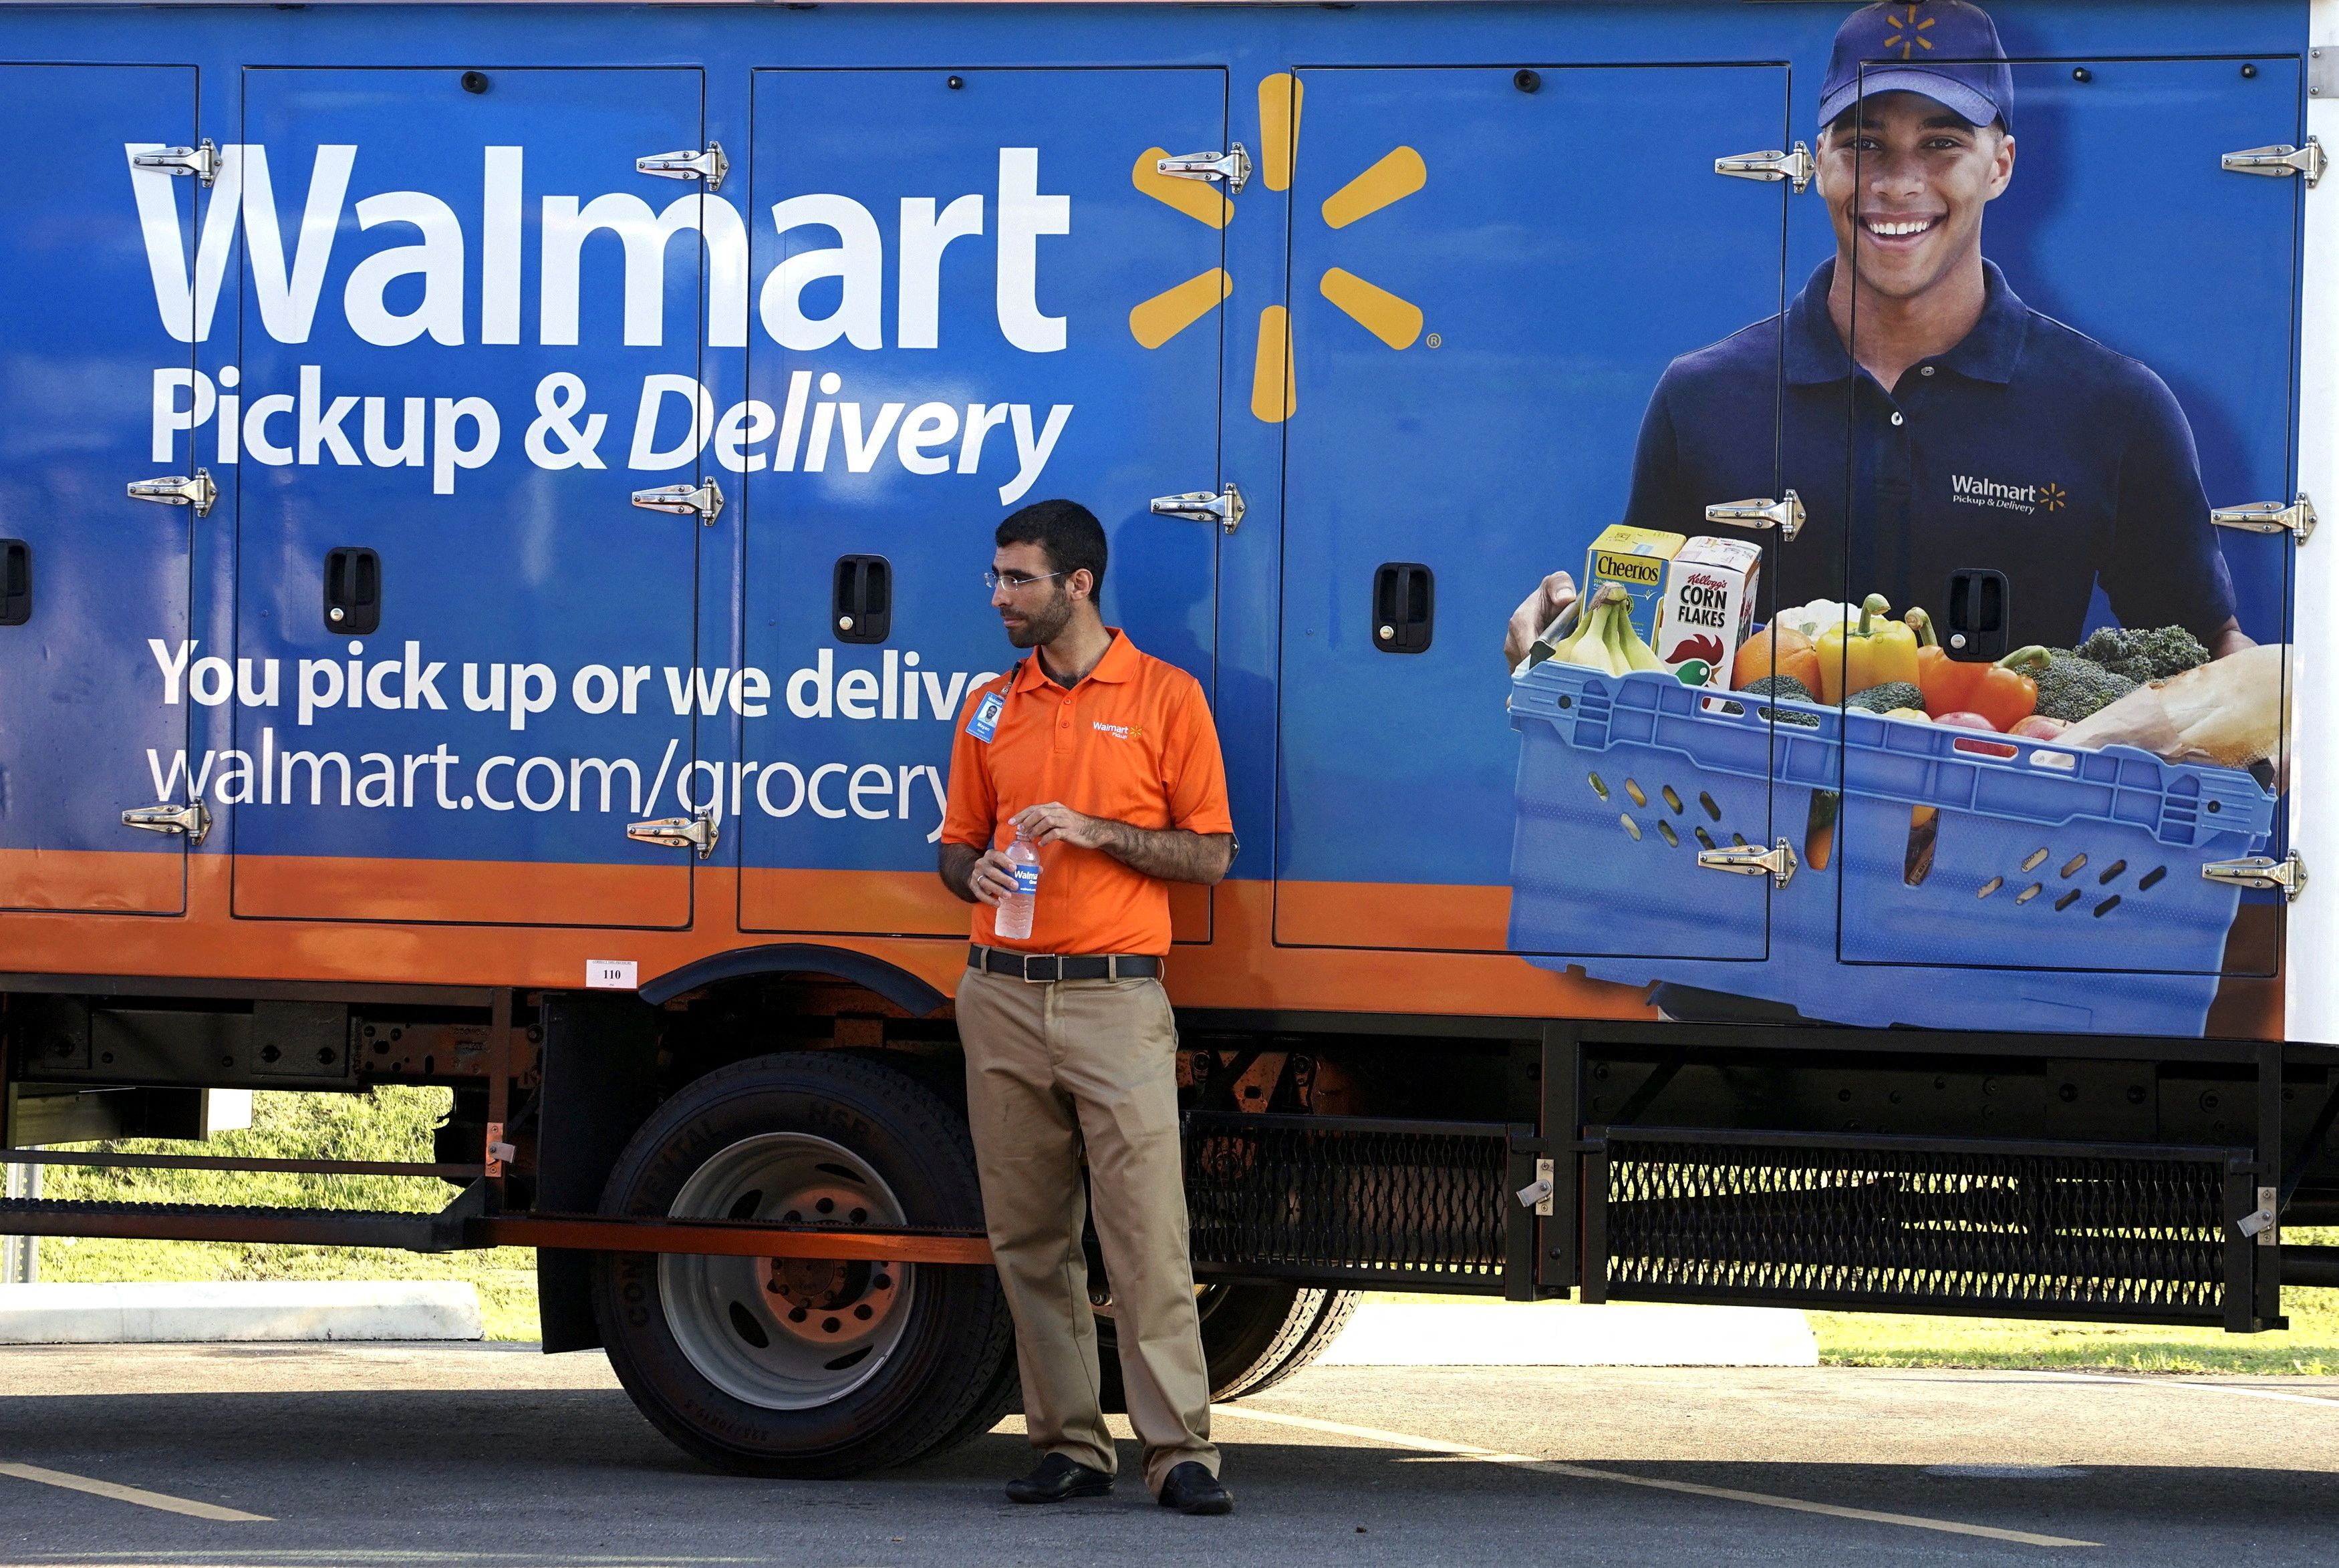 A Wal-Mart Pickup-Grocery employee waits next to a truck at a test store in Bentonville